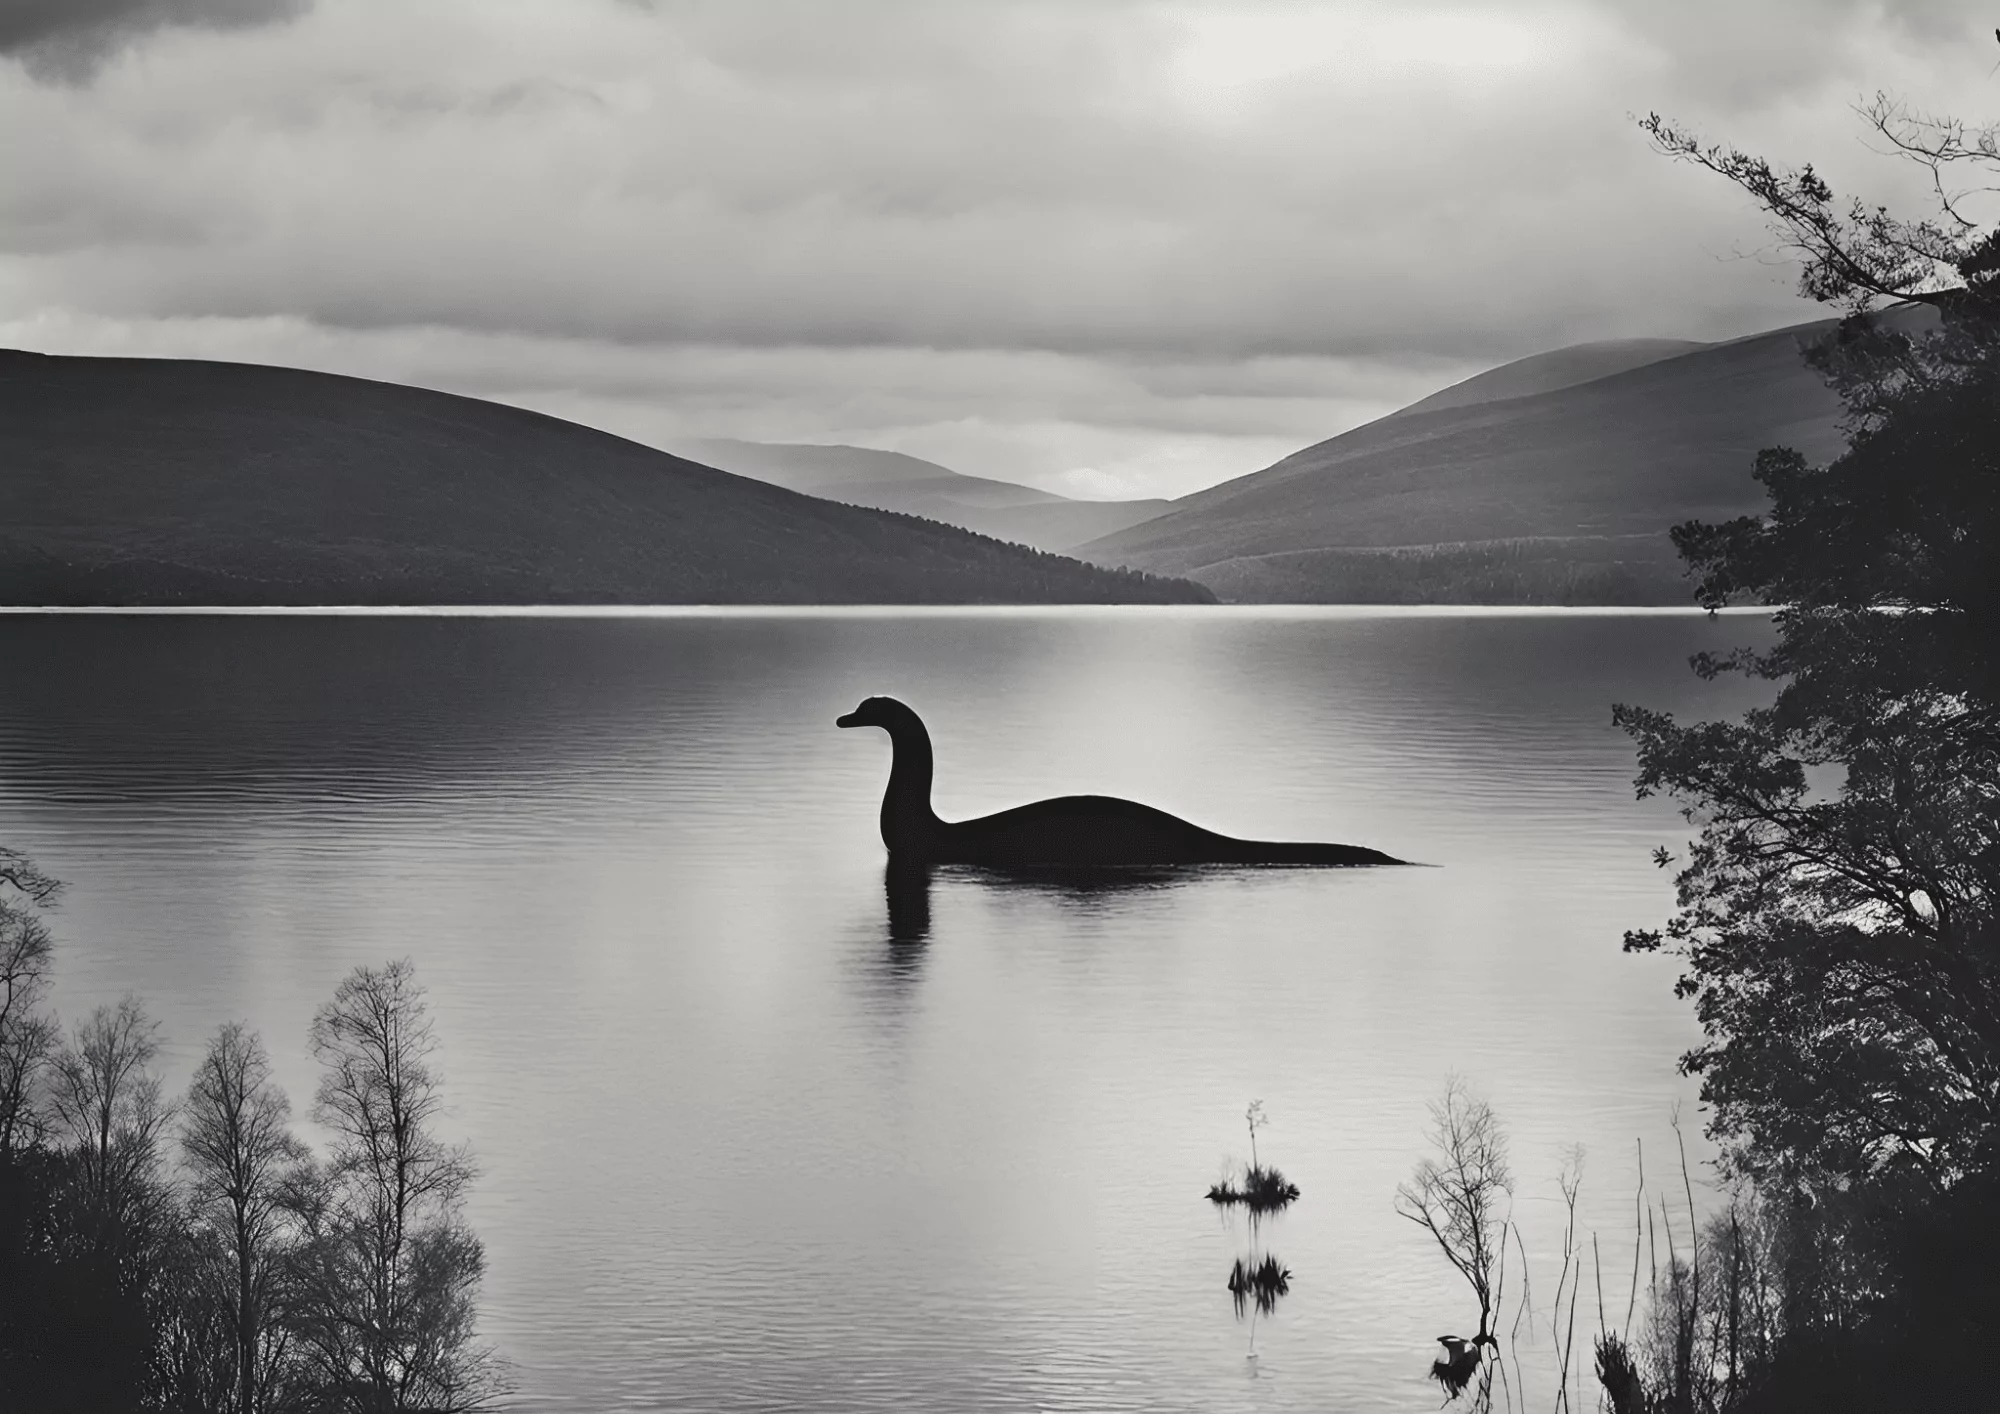 An image of the loch ness monster in a lake